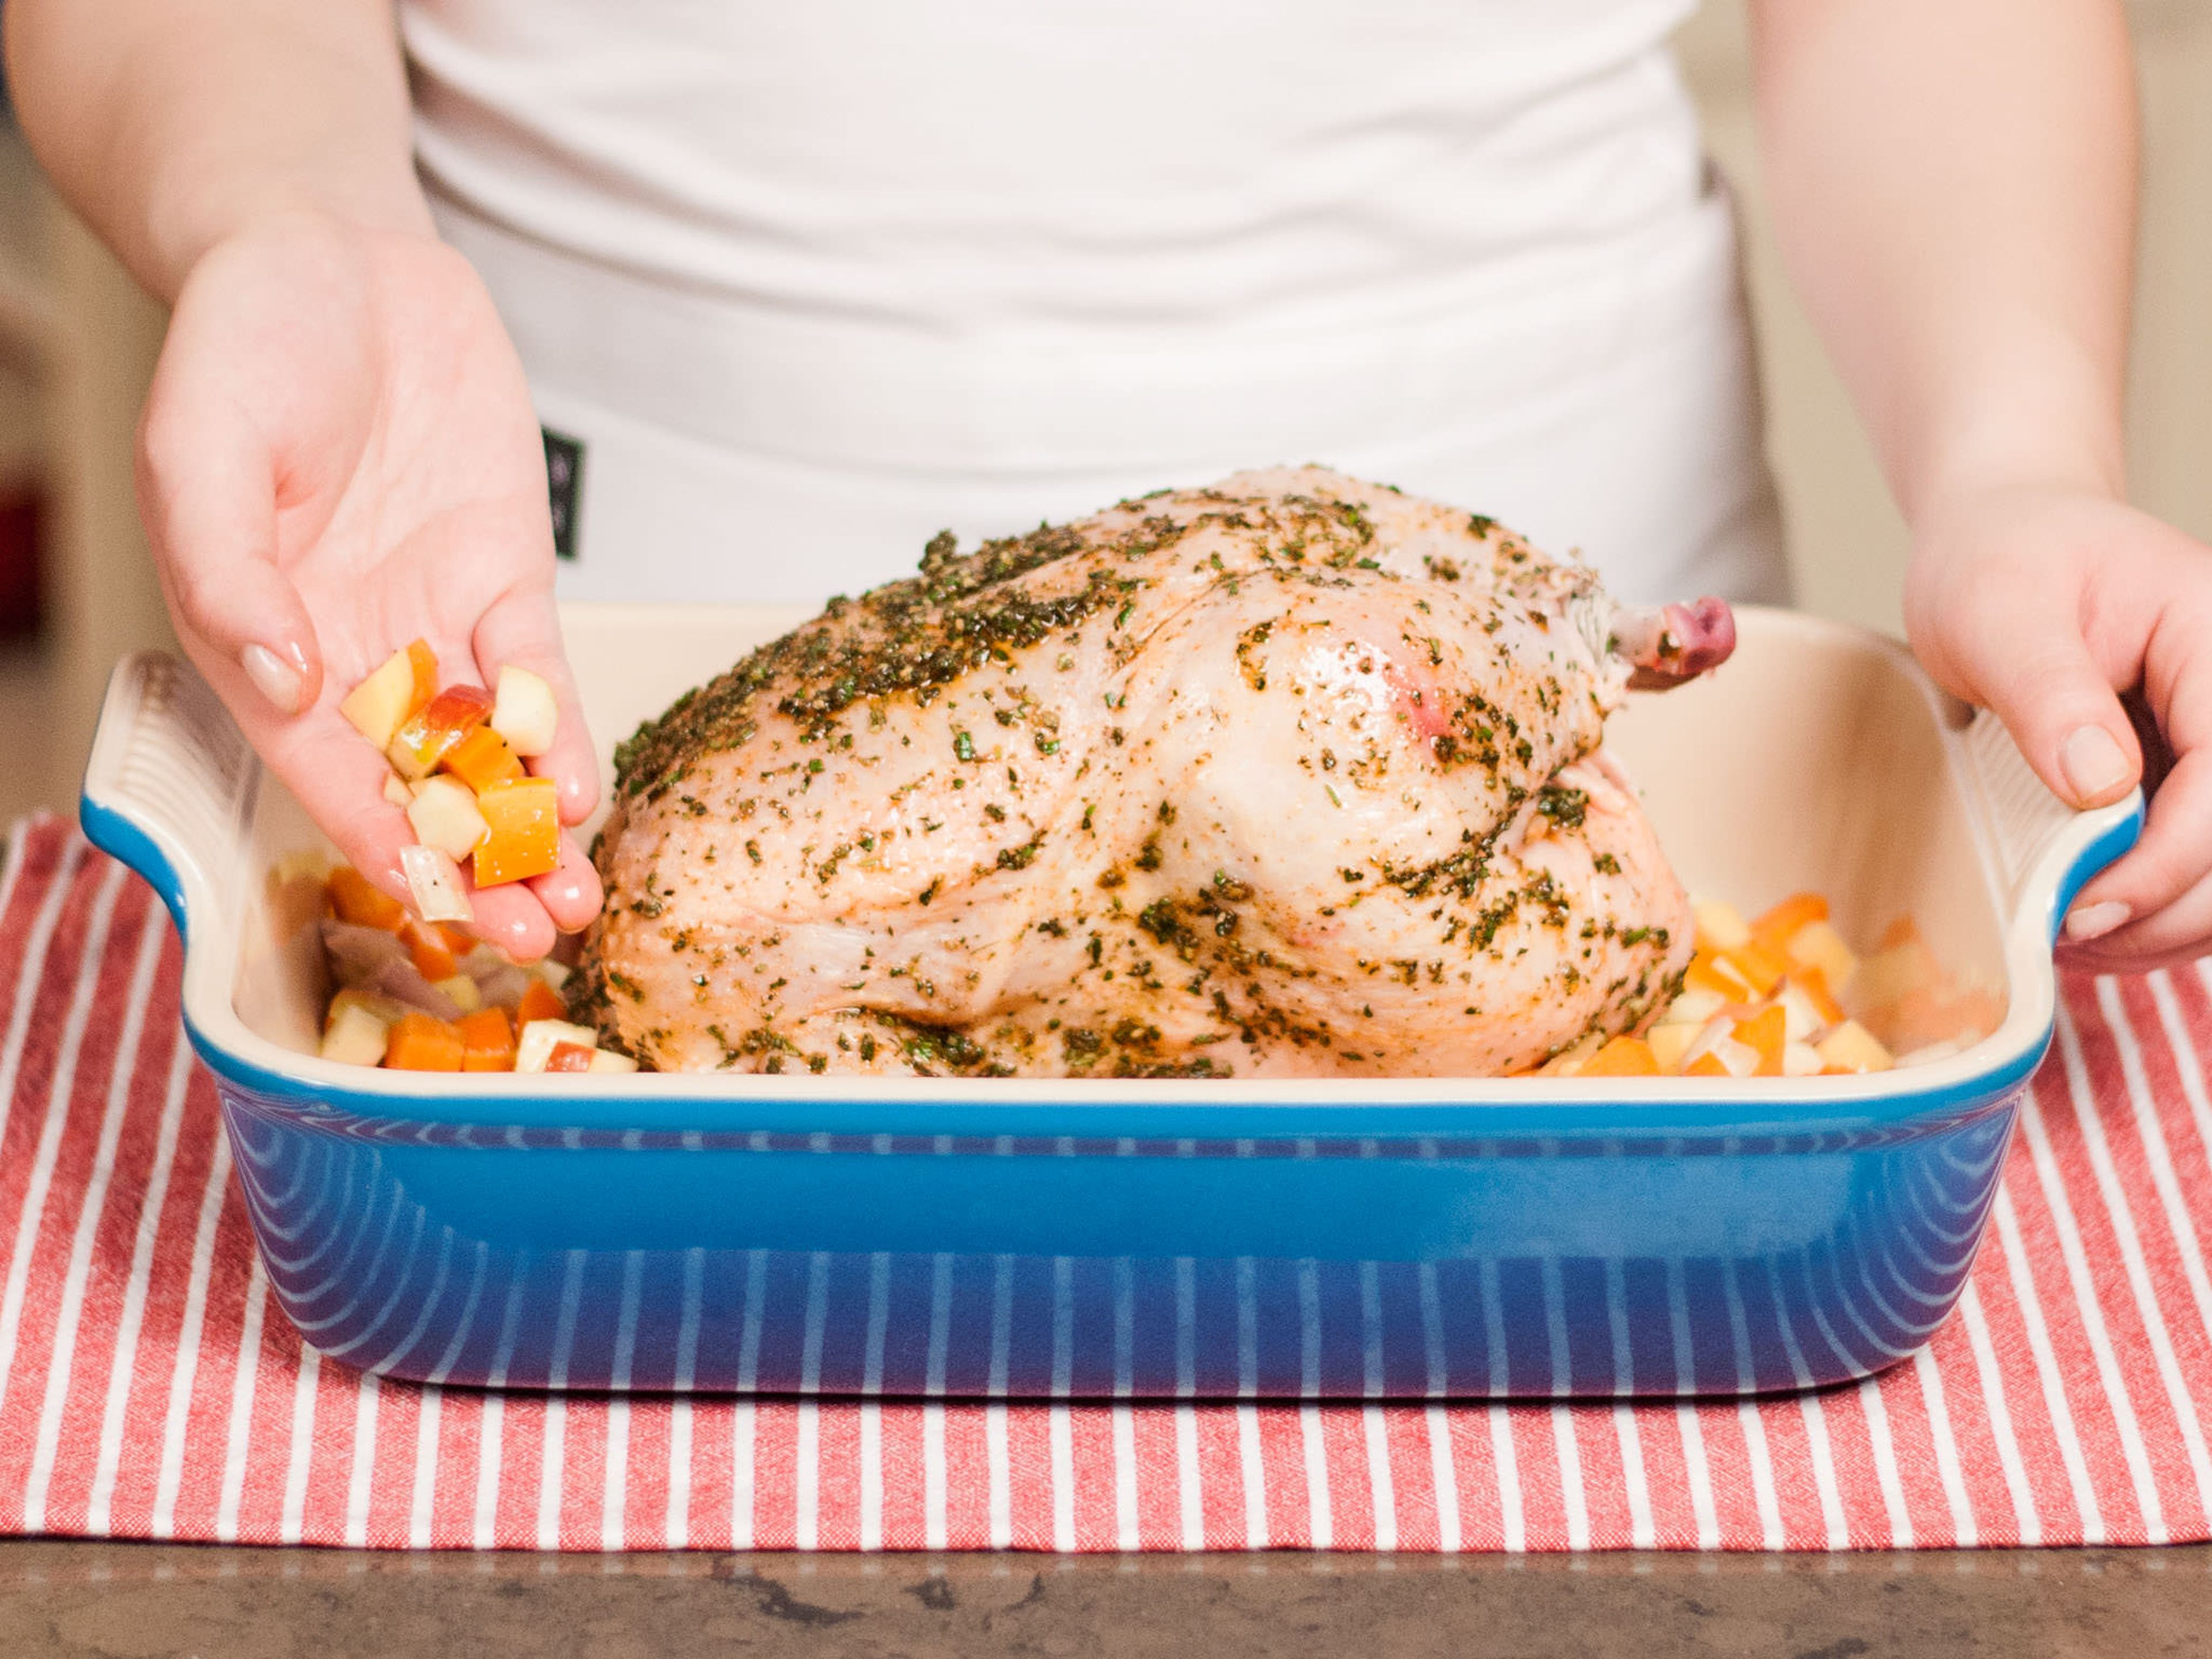 Place chicken in a baking dish and arrange the remainder of the vegetables around the chicken. Cook covered with aluminum foil in a preheated oven at 200°C/400°F for approx. 40 – 50 min. Then uncover and finish cooking at 170°C/335°F for approx. 30 min.